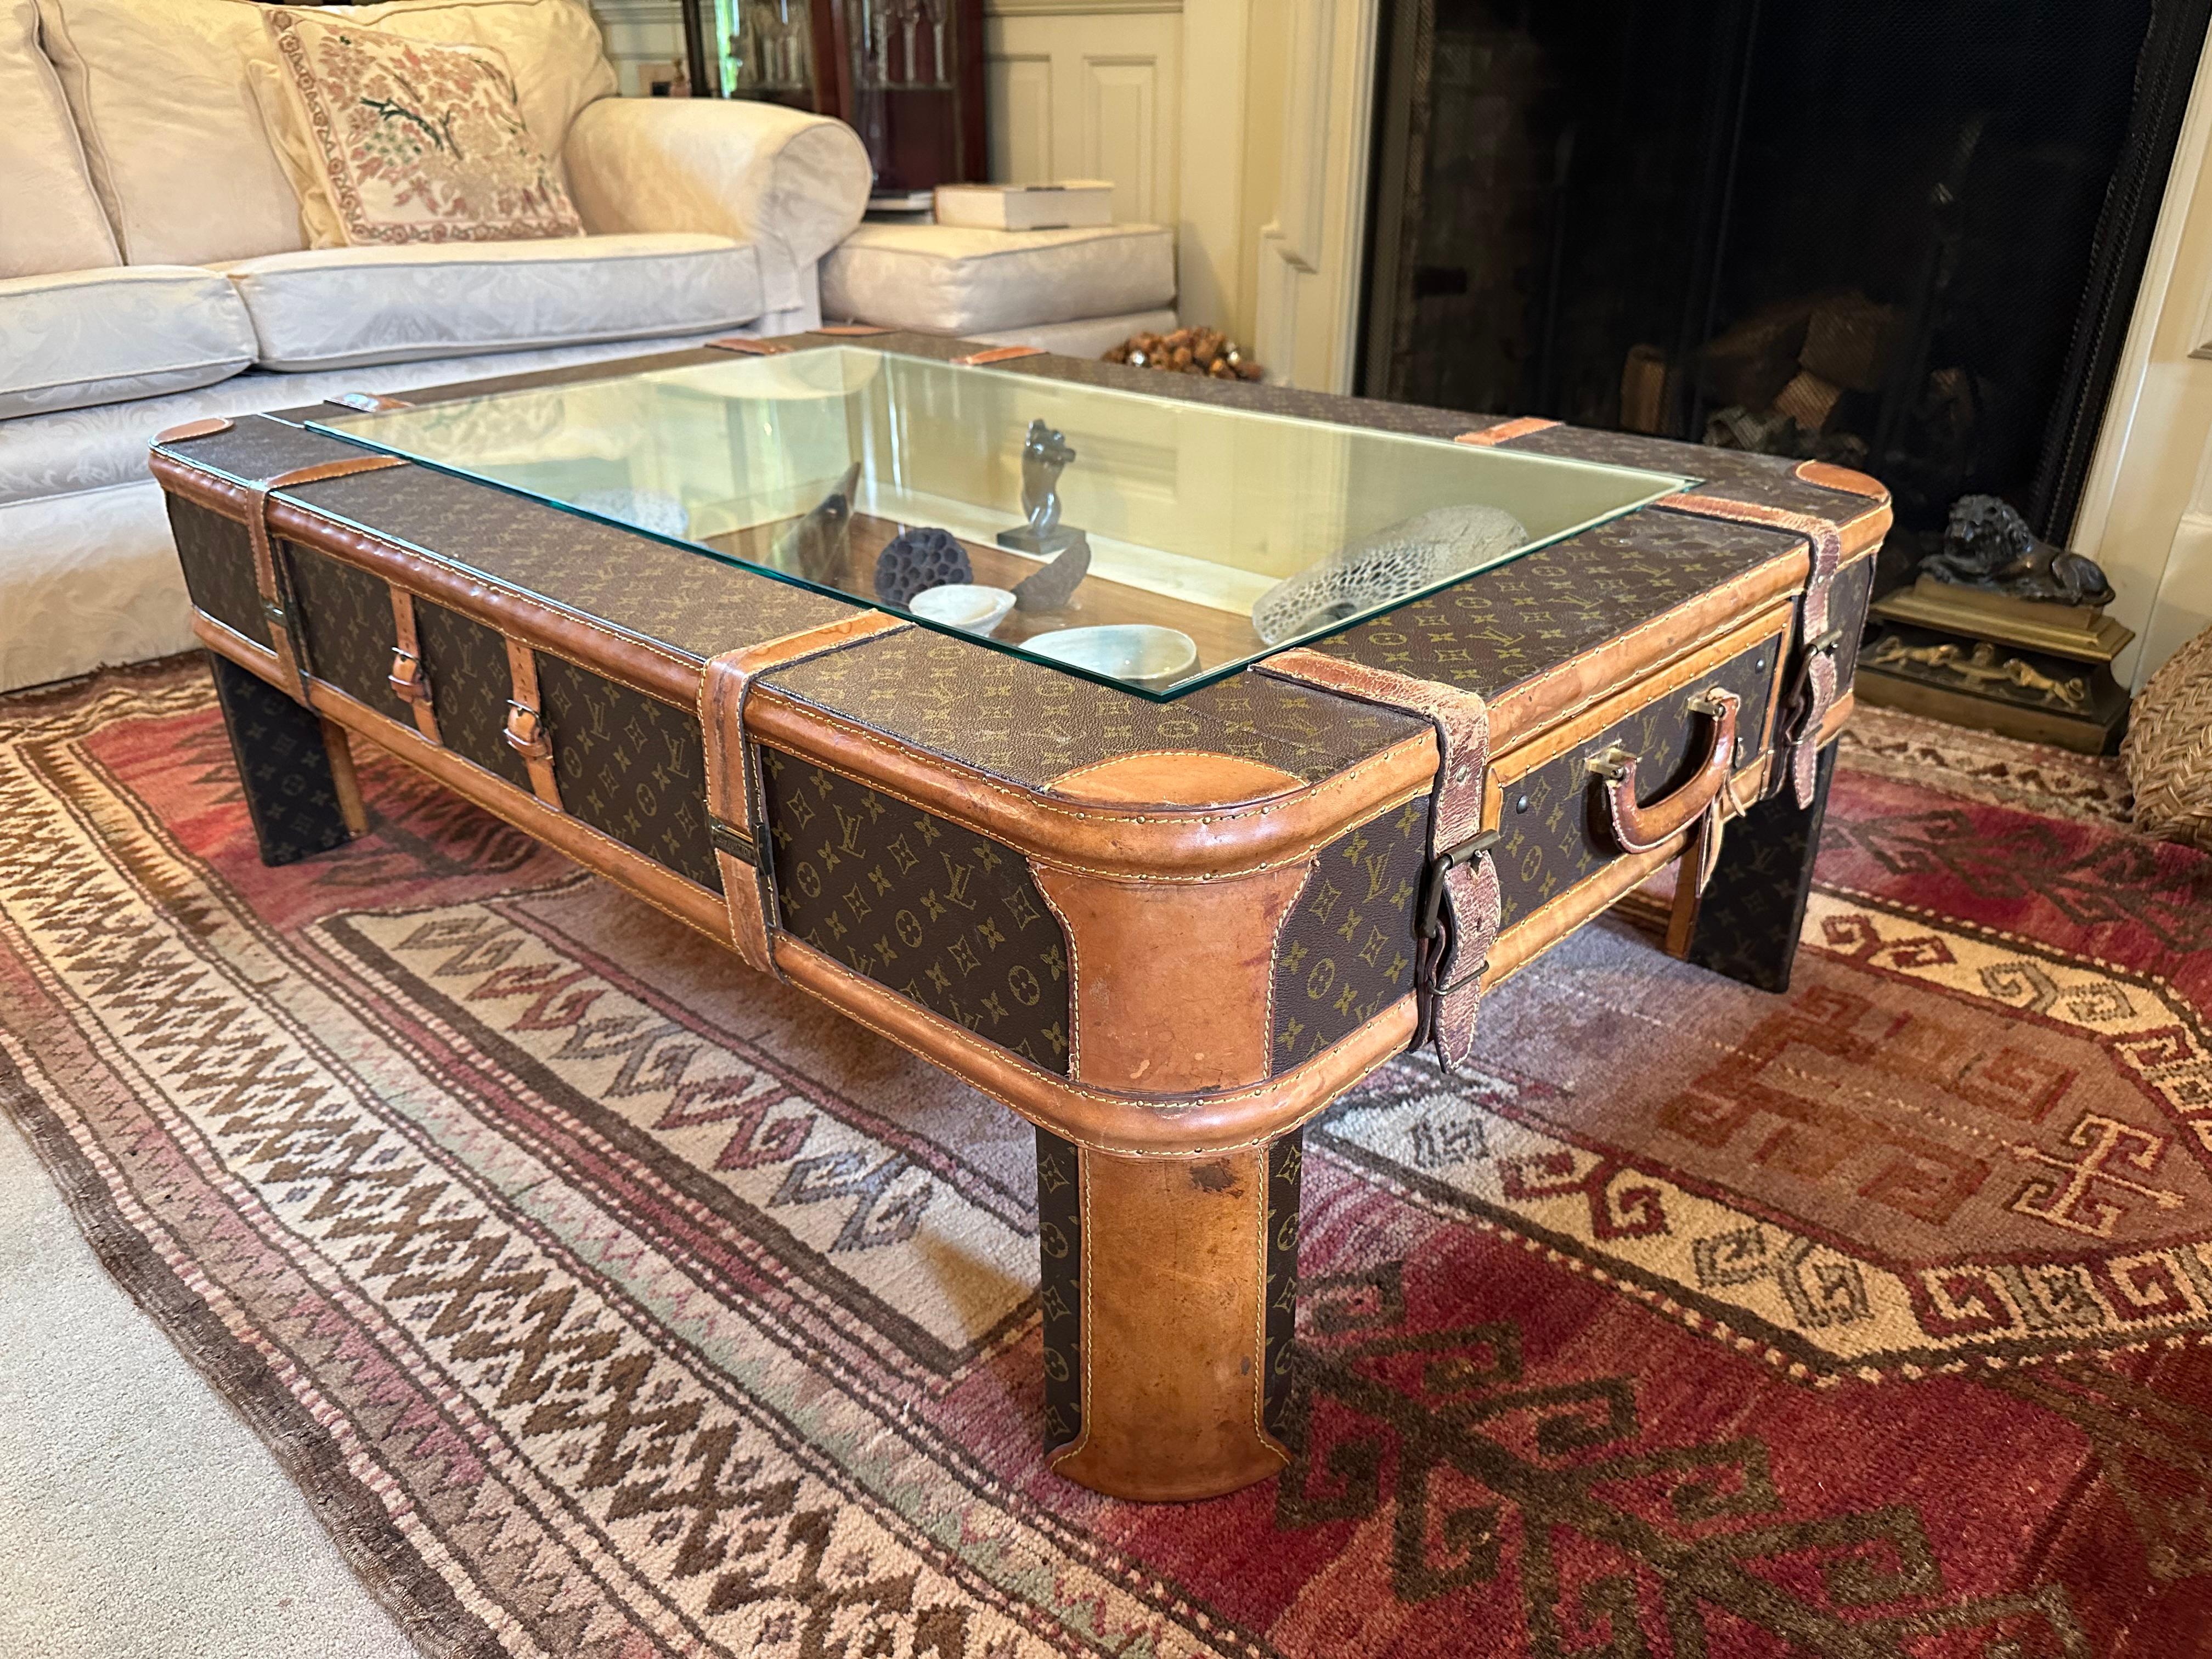 Indulge in the epitome of luxury with our bespoke Louis Vuitton coffee table, a striking fusion of heritage and contemporary design. Crafted from meticulously repurposed Louis Vuitton luggage dating back to the 1960s, this one-of-a-kind masterpiece